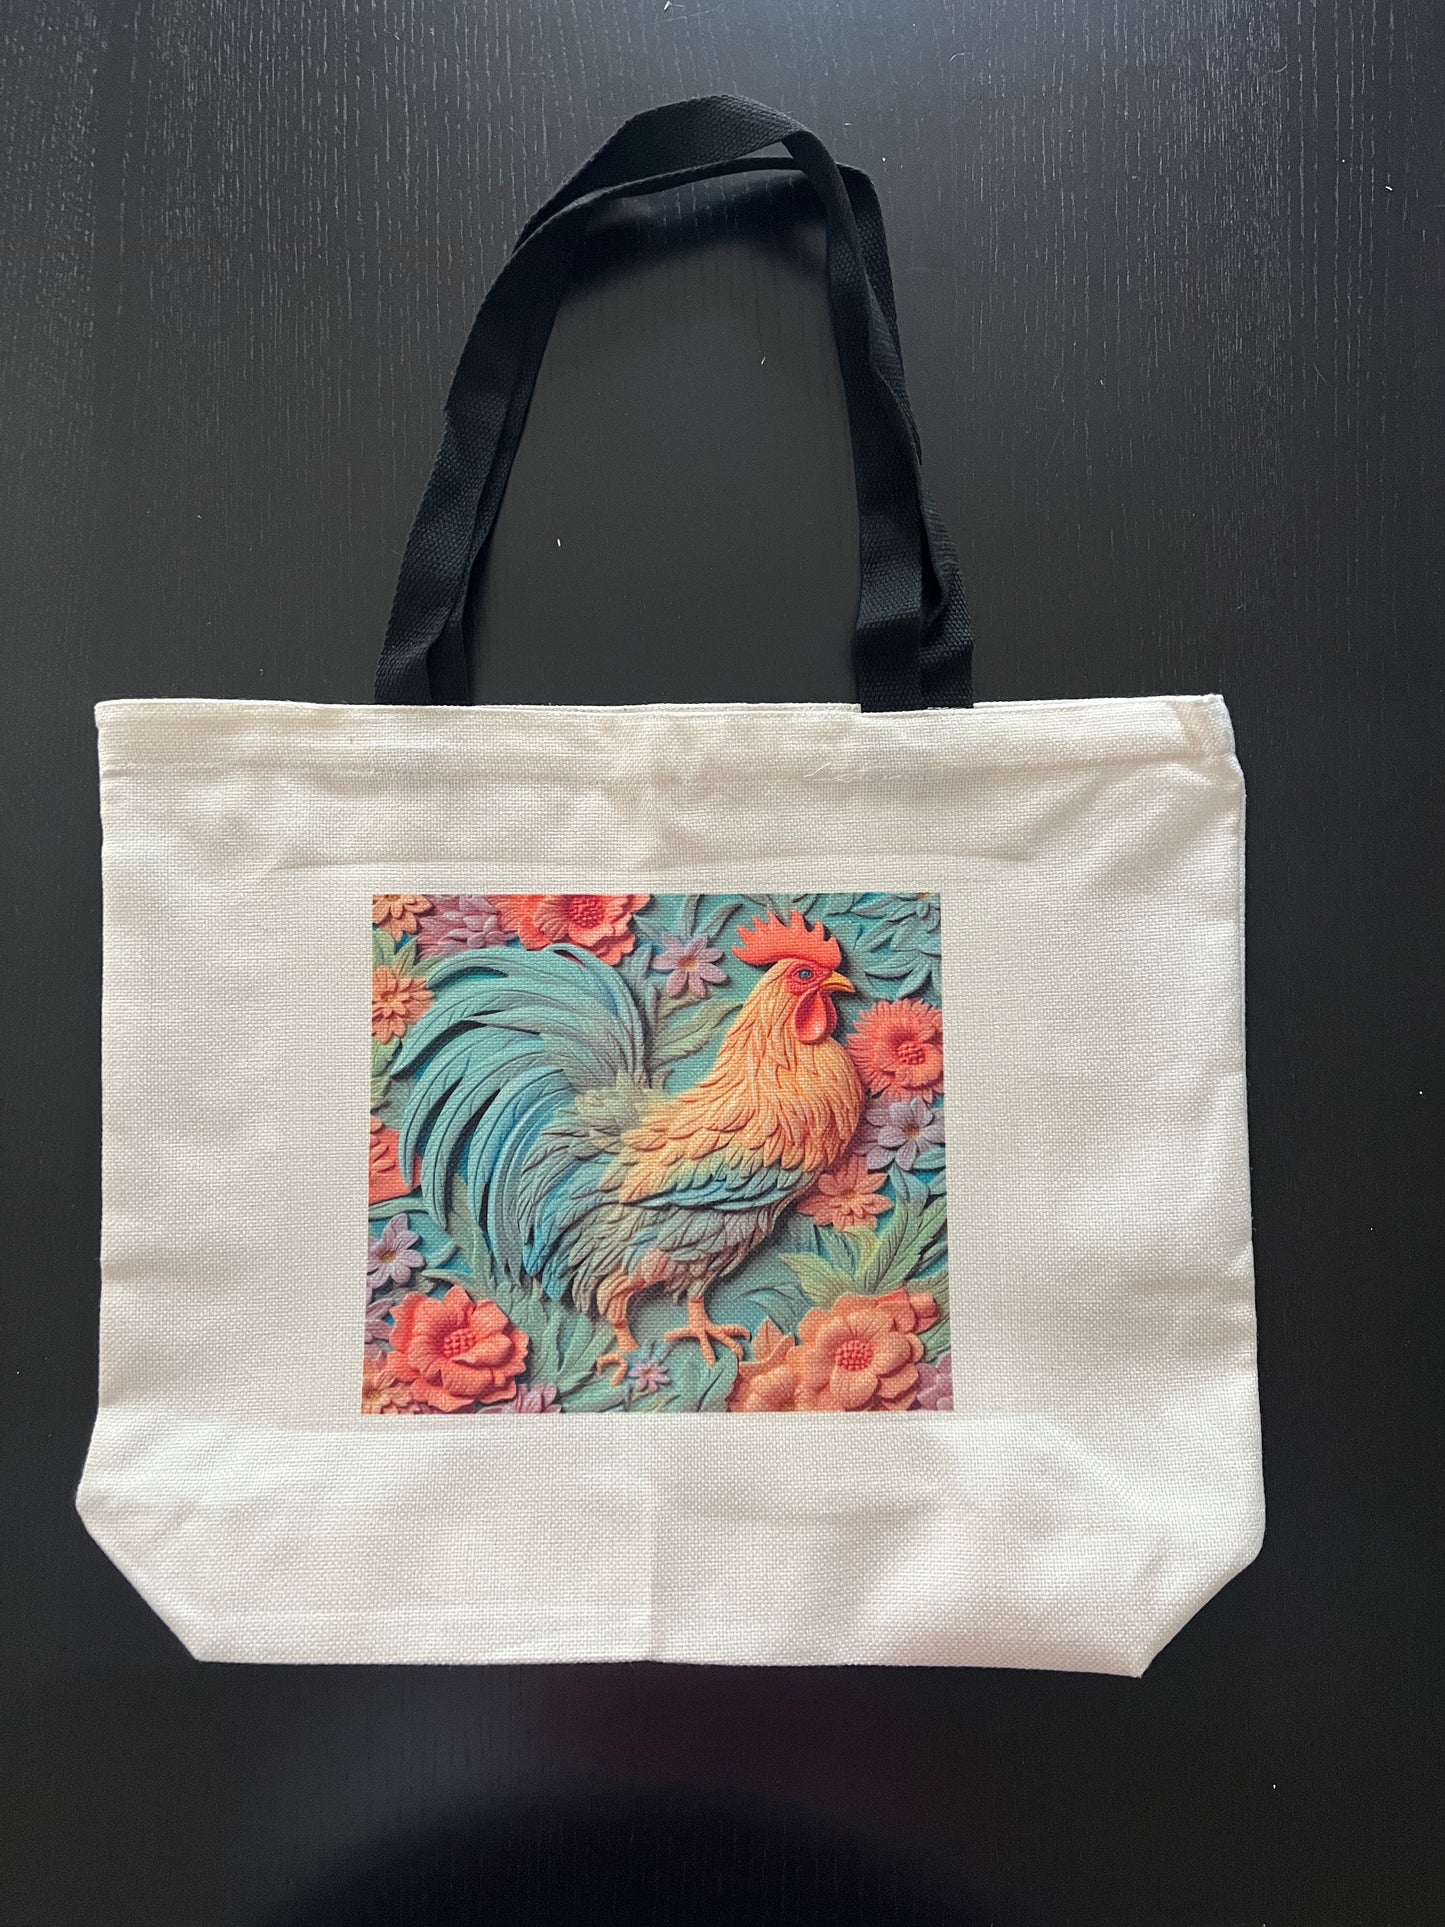 3D Chicken Tote Bag